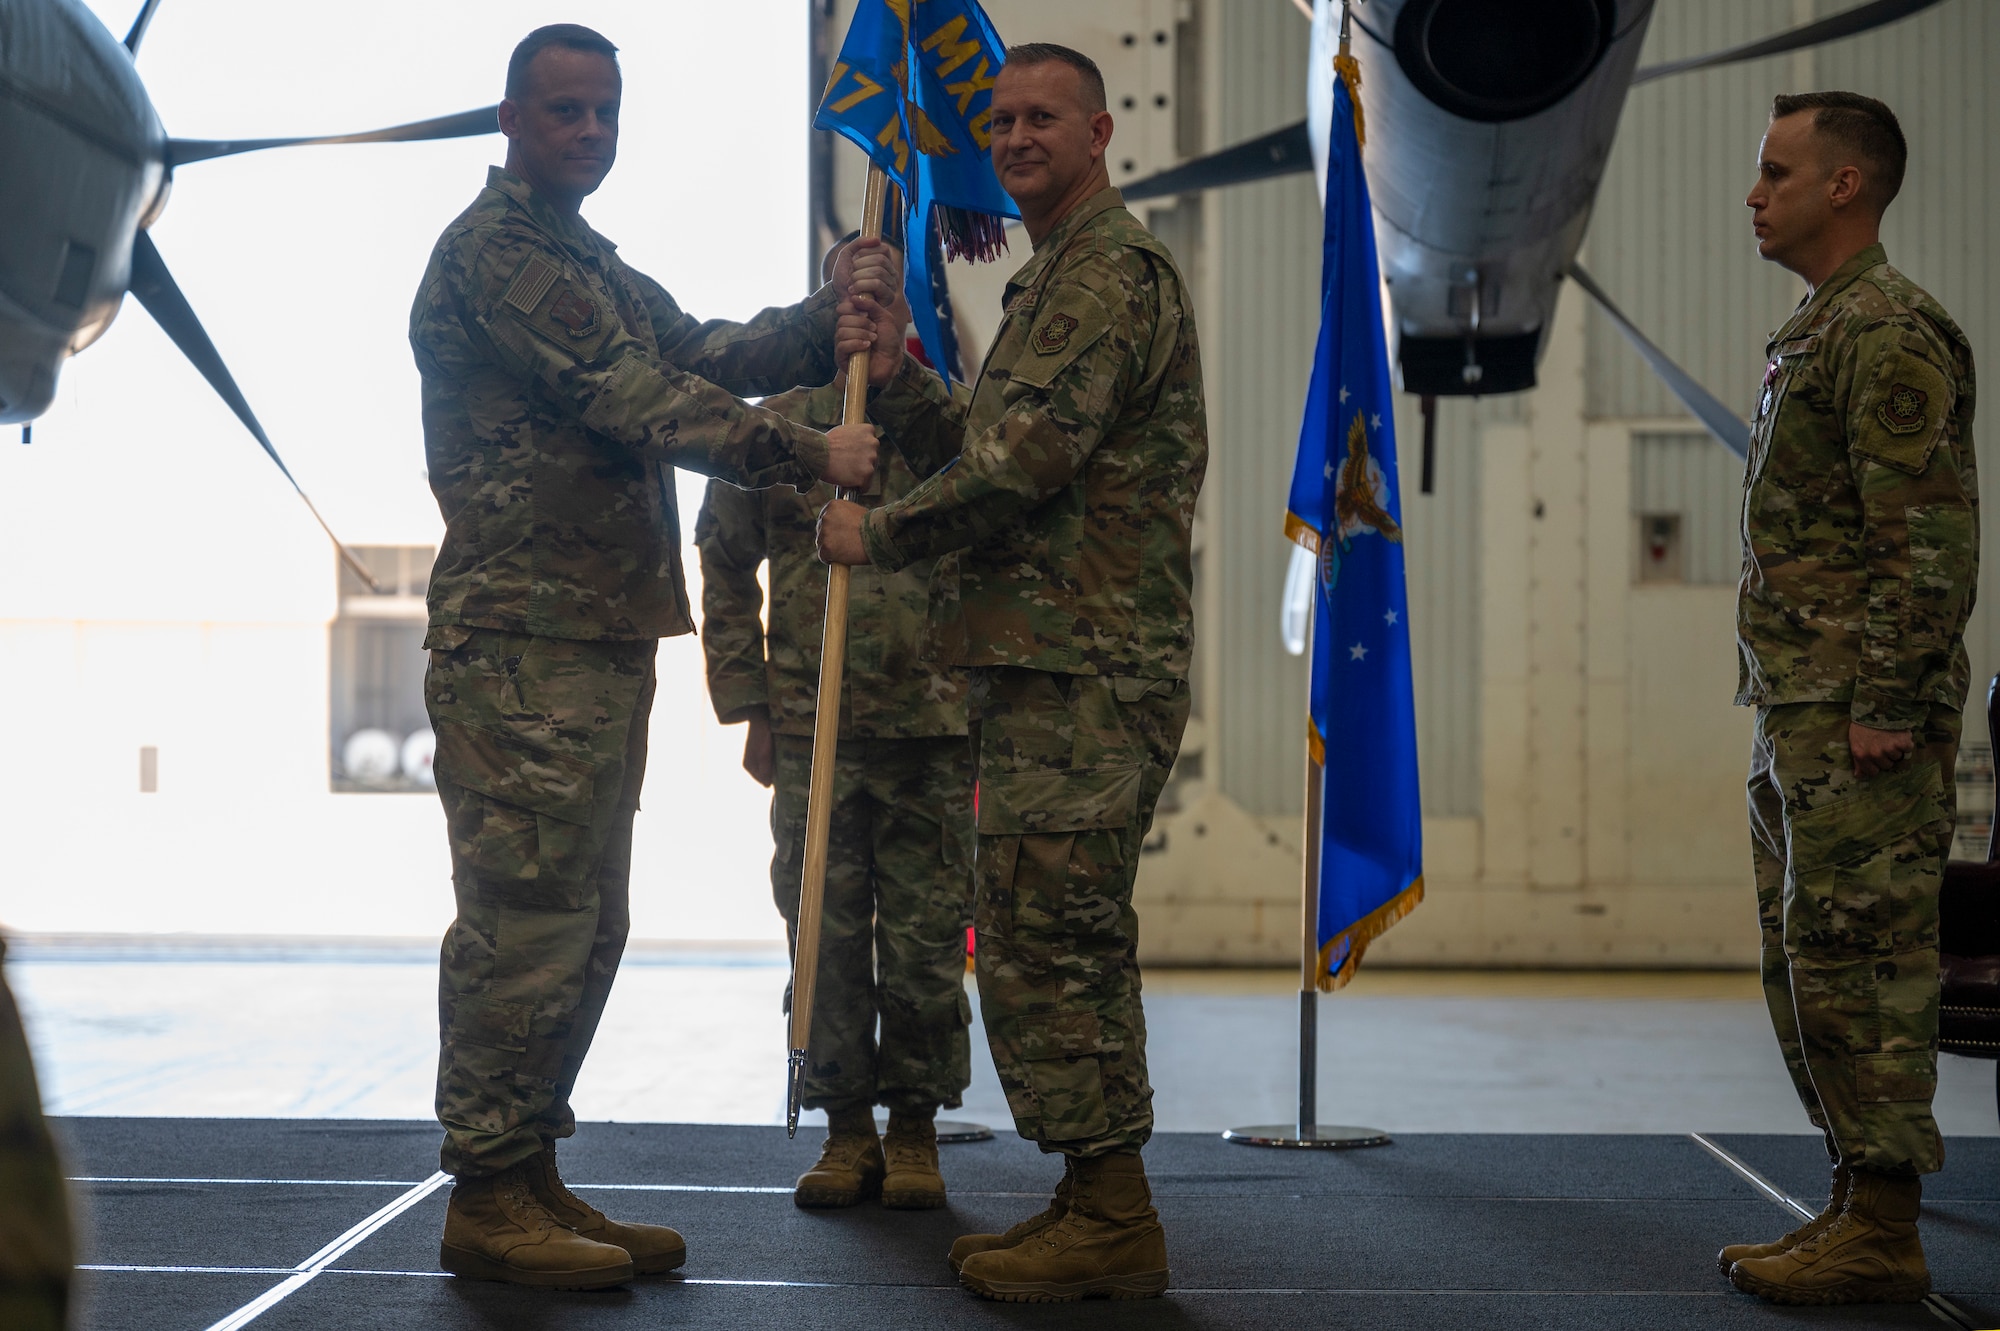 Maj. Daniel Finney, incoming 317th Maintenance Squadron commander, takes the guidon from Col. Jeffrey Darden, 317th Maintenance Group commander during a change of command ceremony at Dyess Air Force Base, Texas, 17 Jun 2022. Finney takes command of a squadron that is responsible  for performing on-and-off equipment maintenance on 28 C-130J aircraft and components supporting the group's global reach airlift mission. (U.S. Air Force photo by Senior Airman Reilly McGuire)